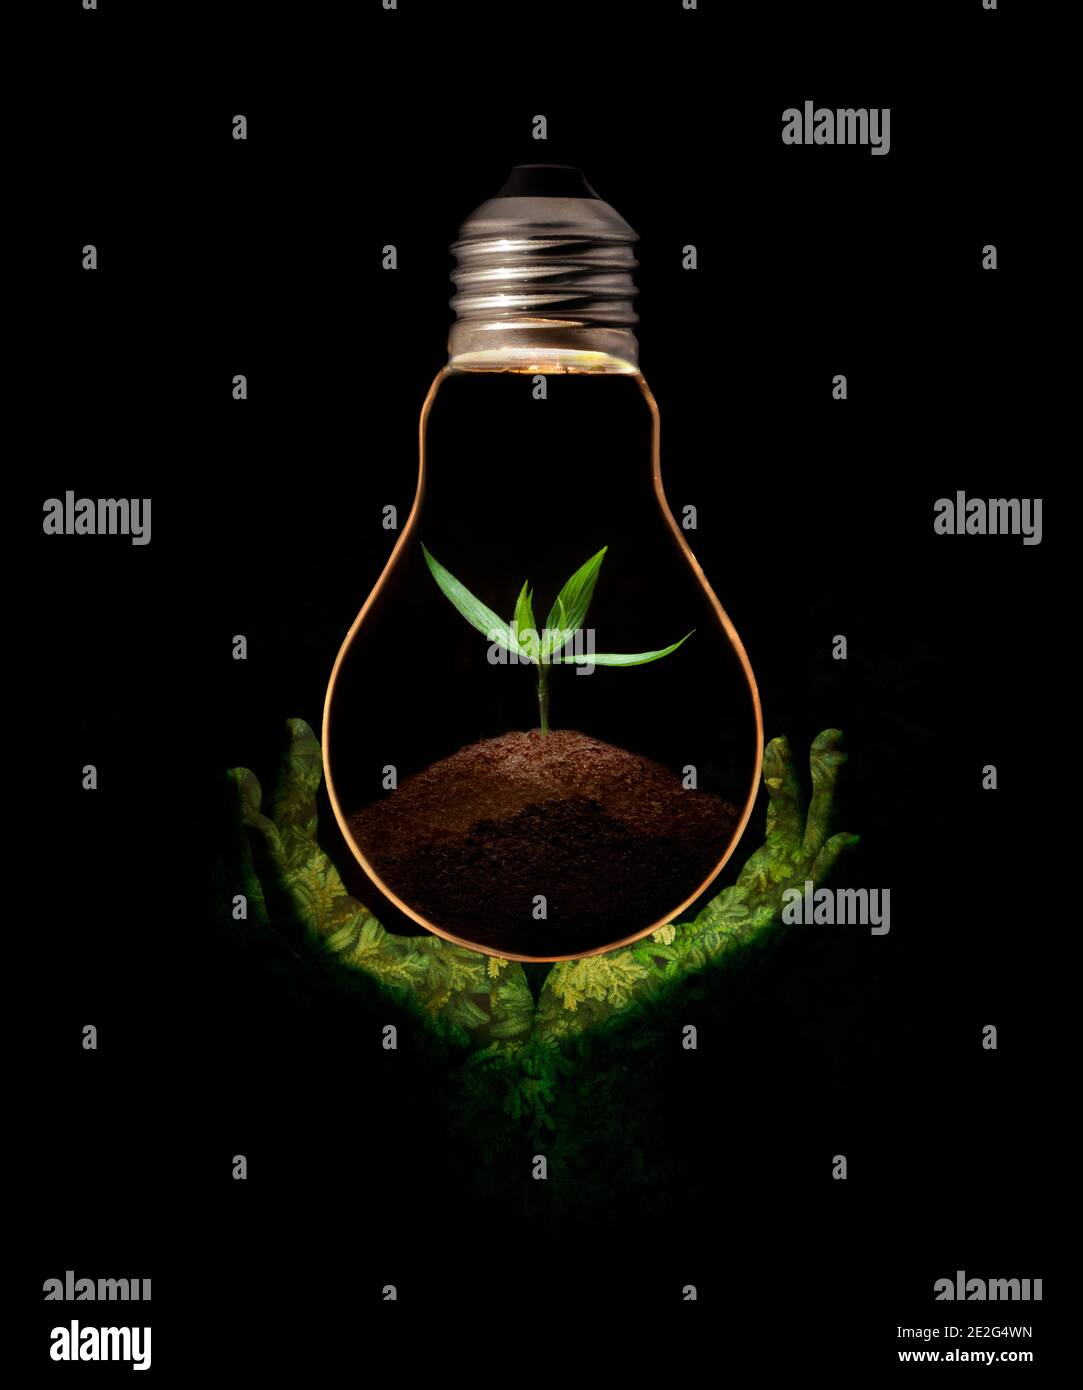 Green hand holding a light bulb with fresh green leaves inside, isolated on black background. Stock Photo